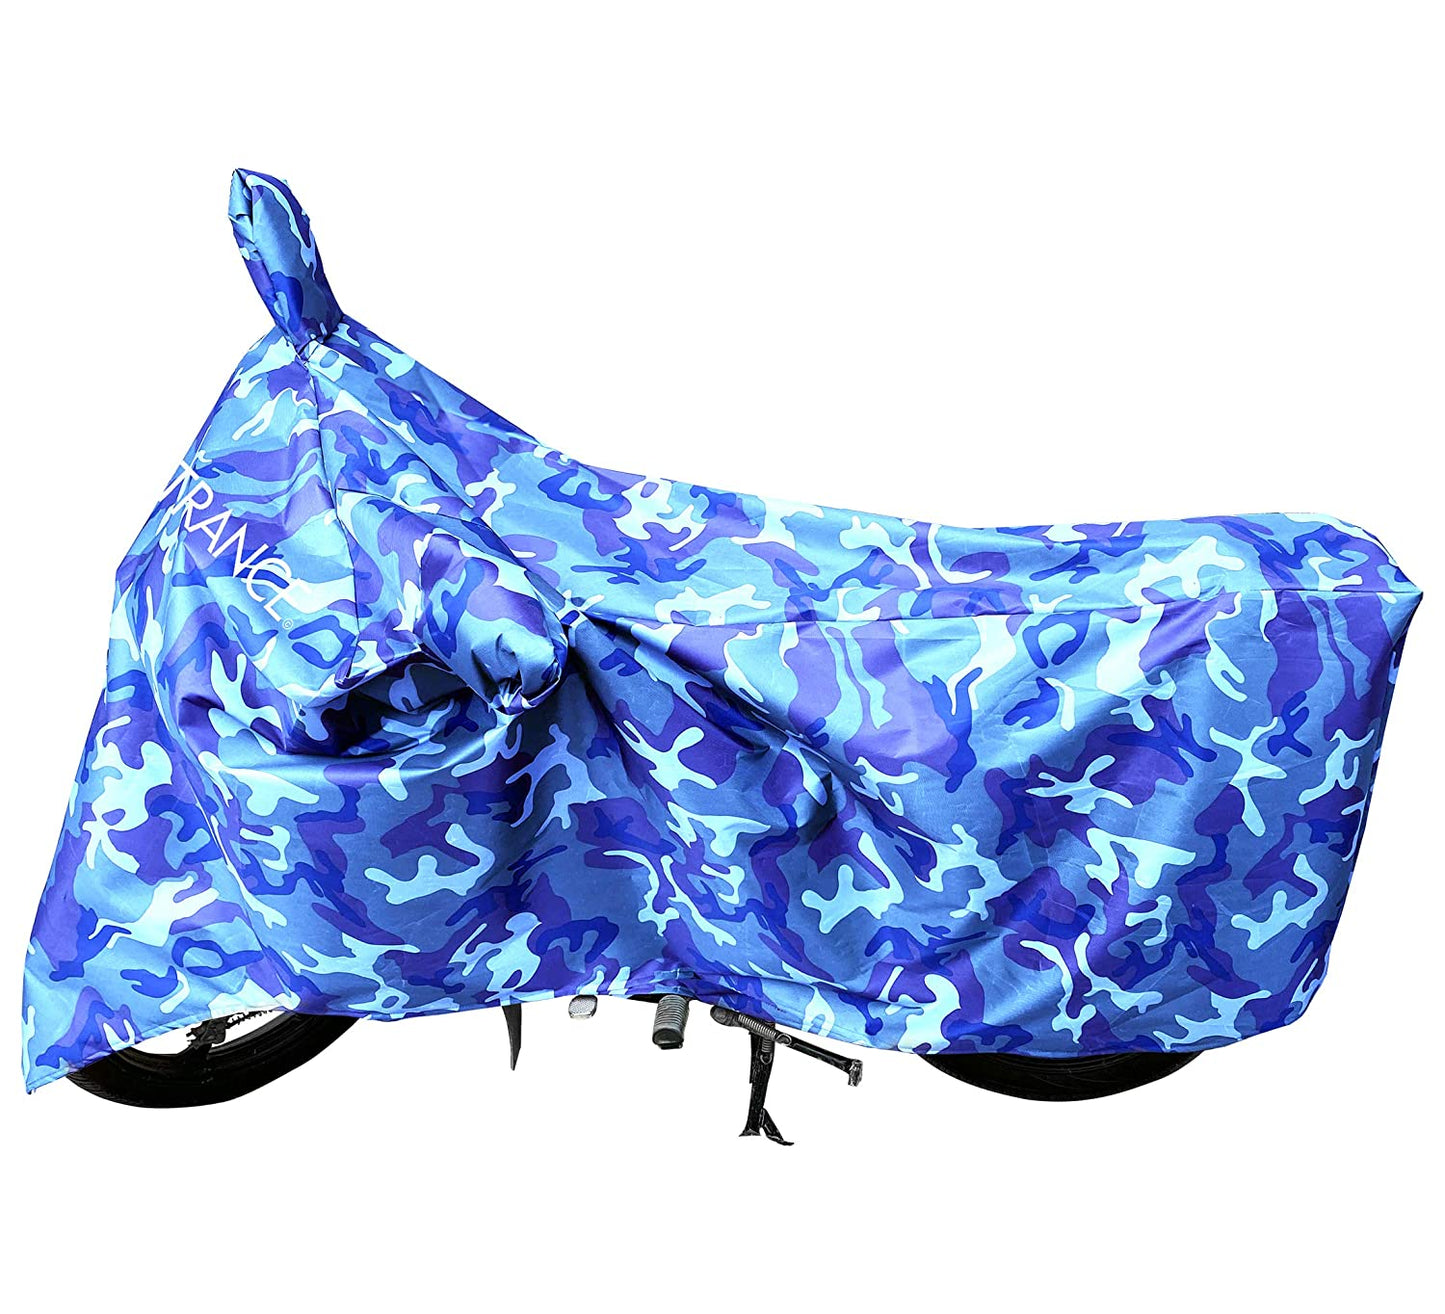 MotoTrance Jungle Bike Body Covers For Hero Xtreme Sports - Interlock-Stitched Waterproof and Heat Resistant with Mirror Pockets